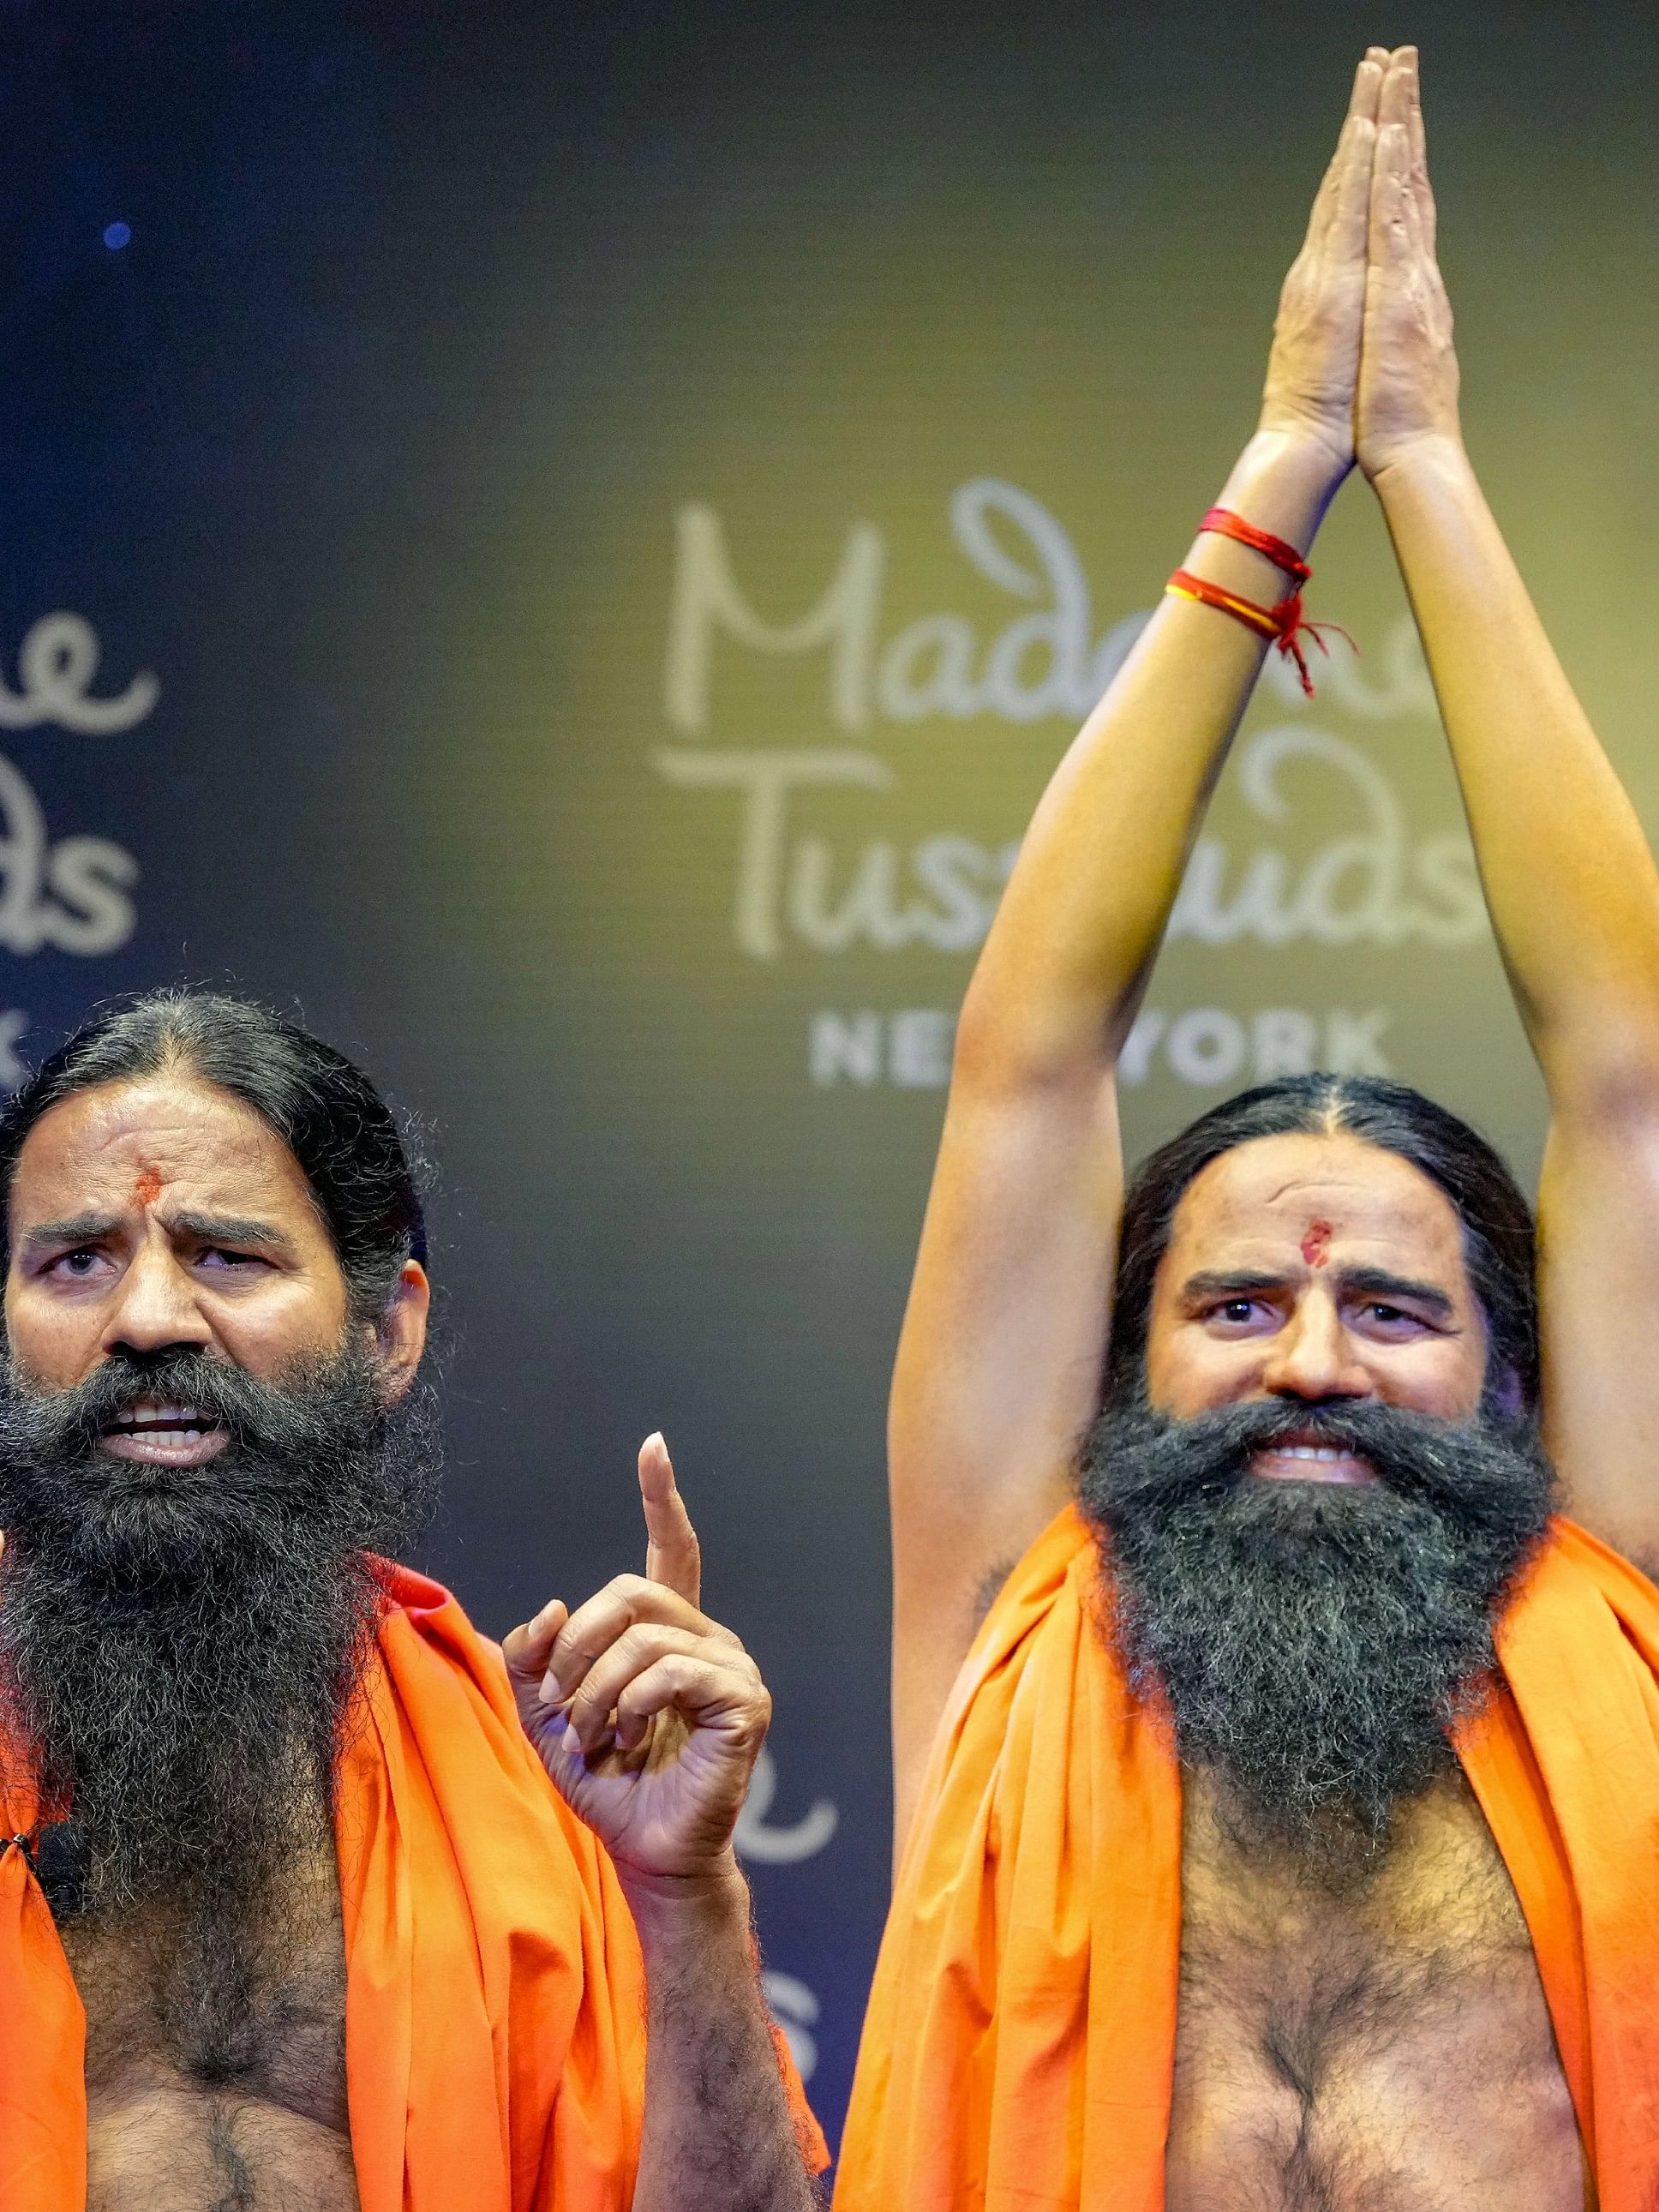 What would you name Baba Ramdev's yoga pose on India Today cover? |  TheHealthSite.com